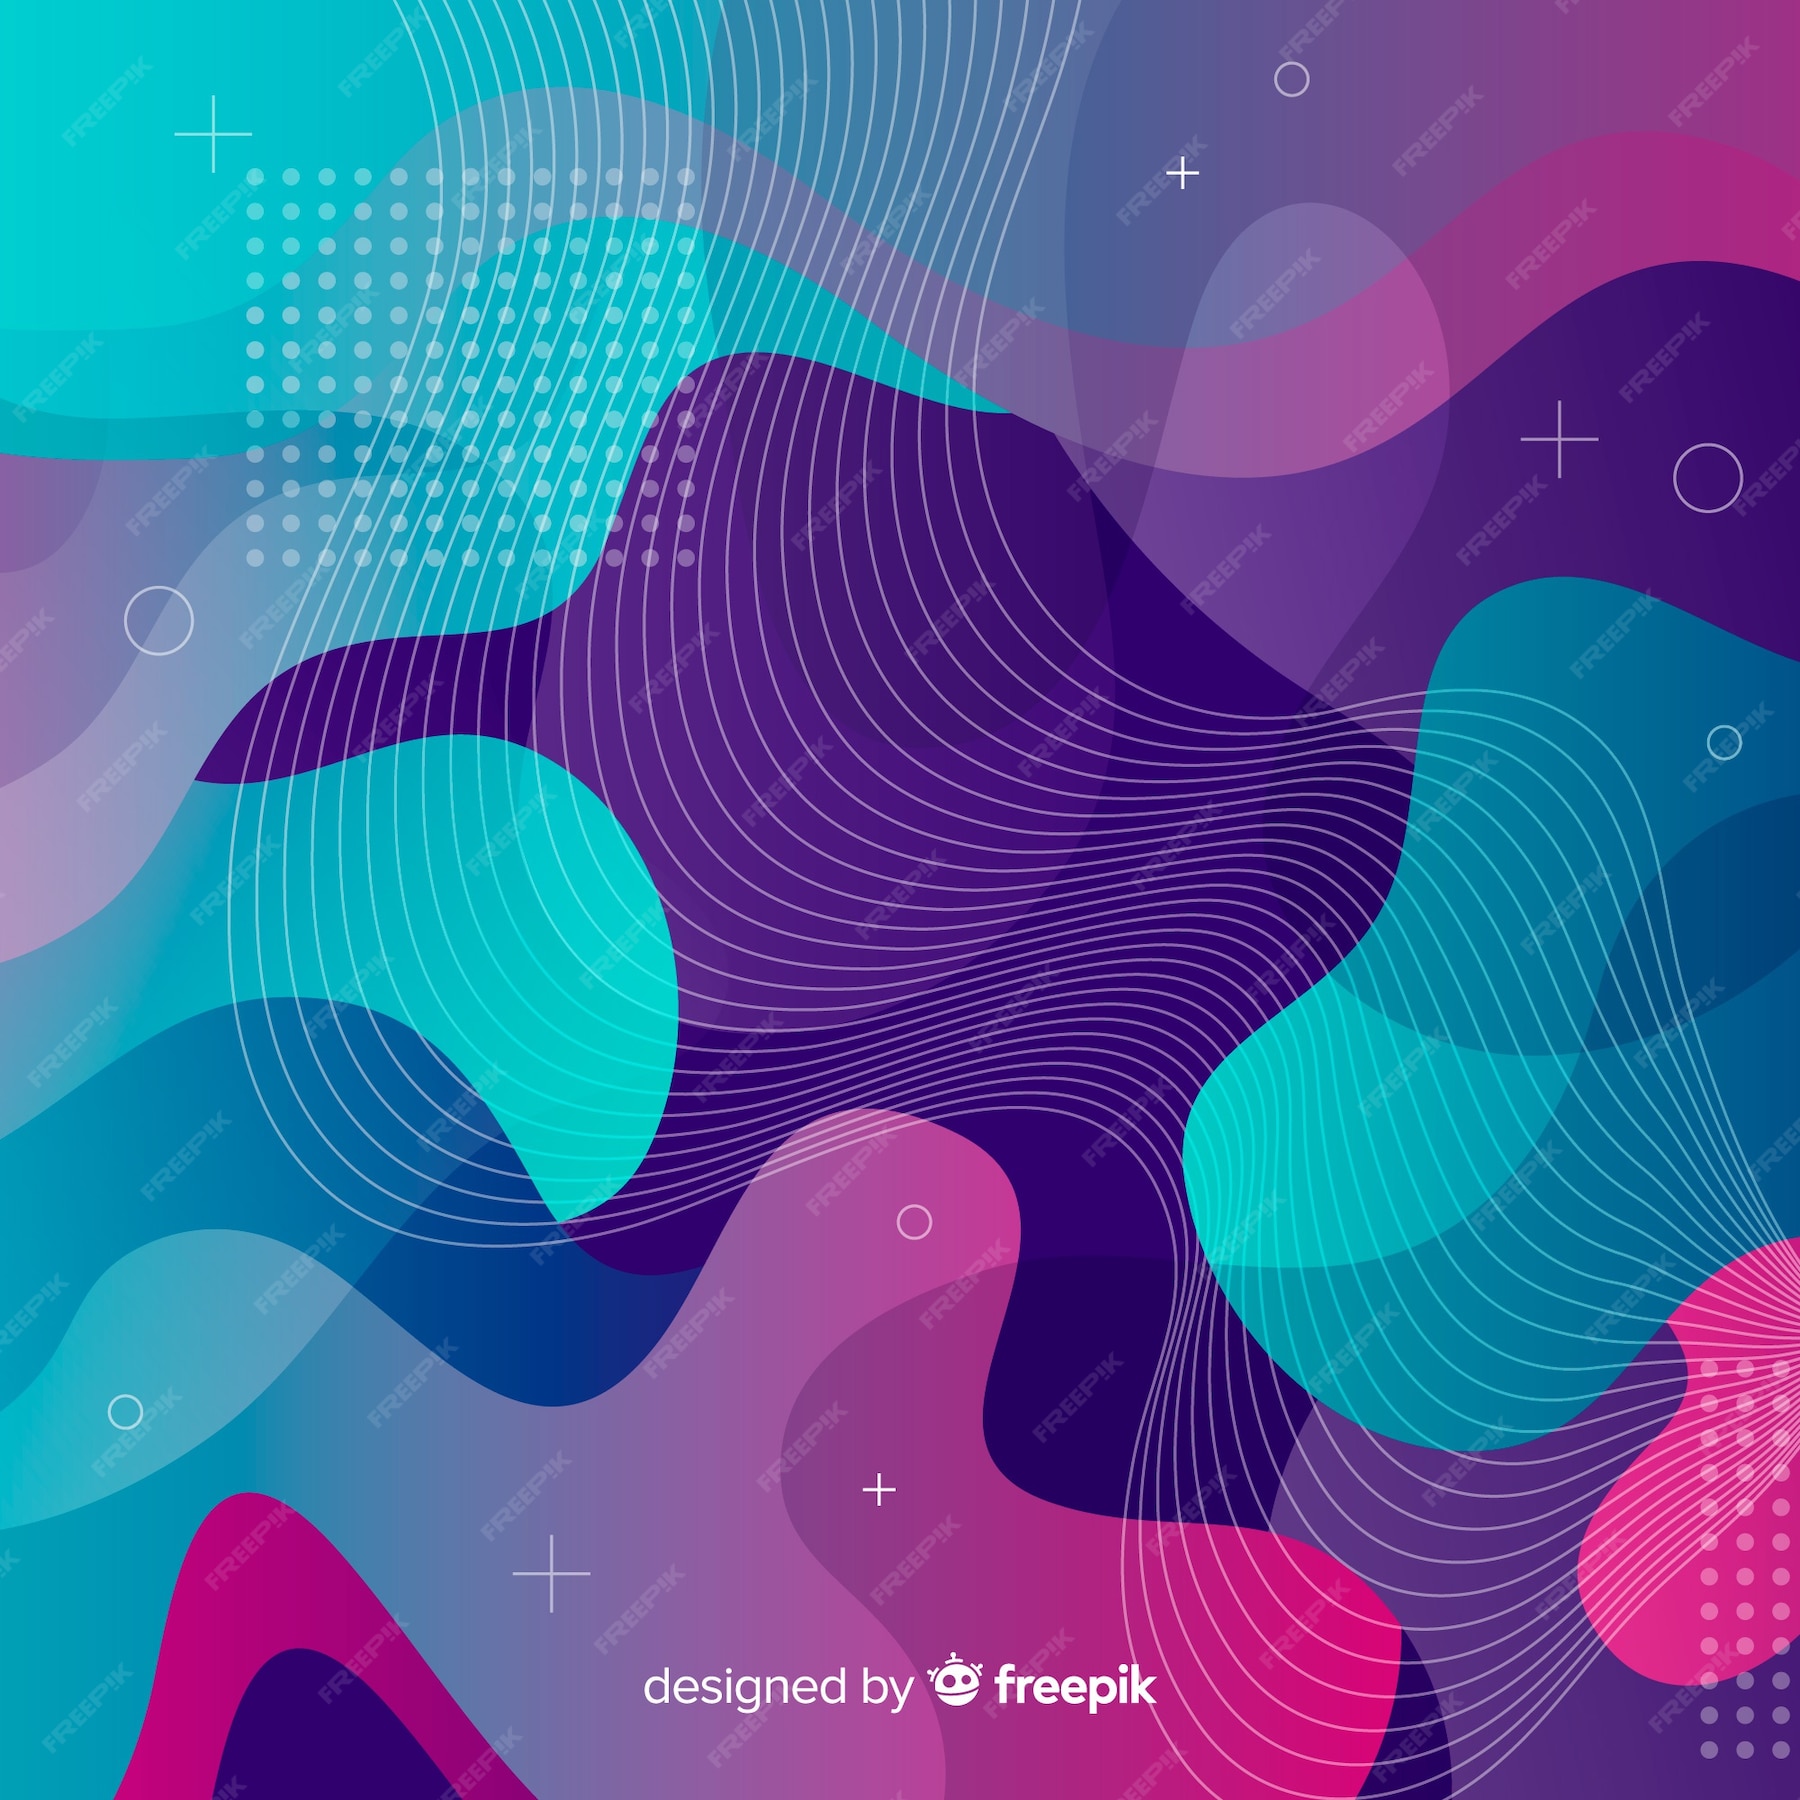 Free Vector | Abstract colorful flow shapes background